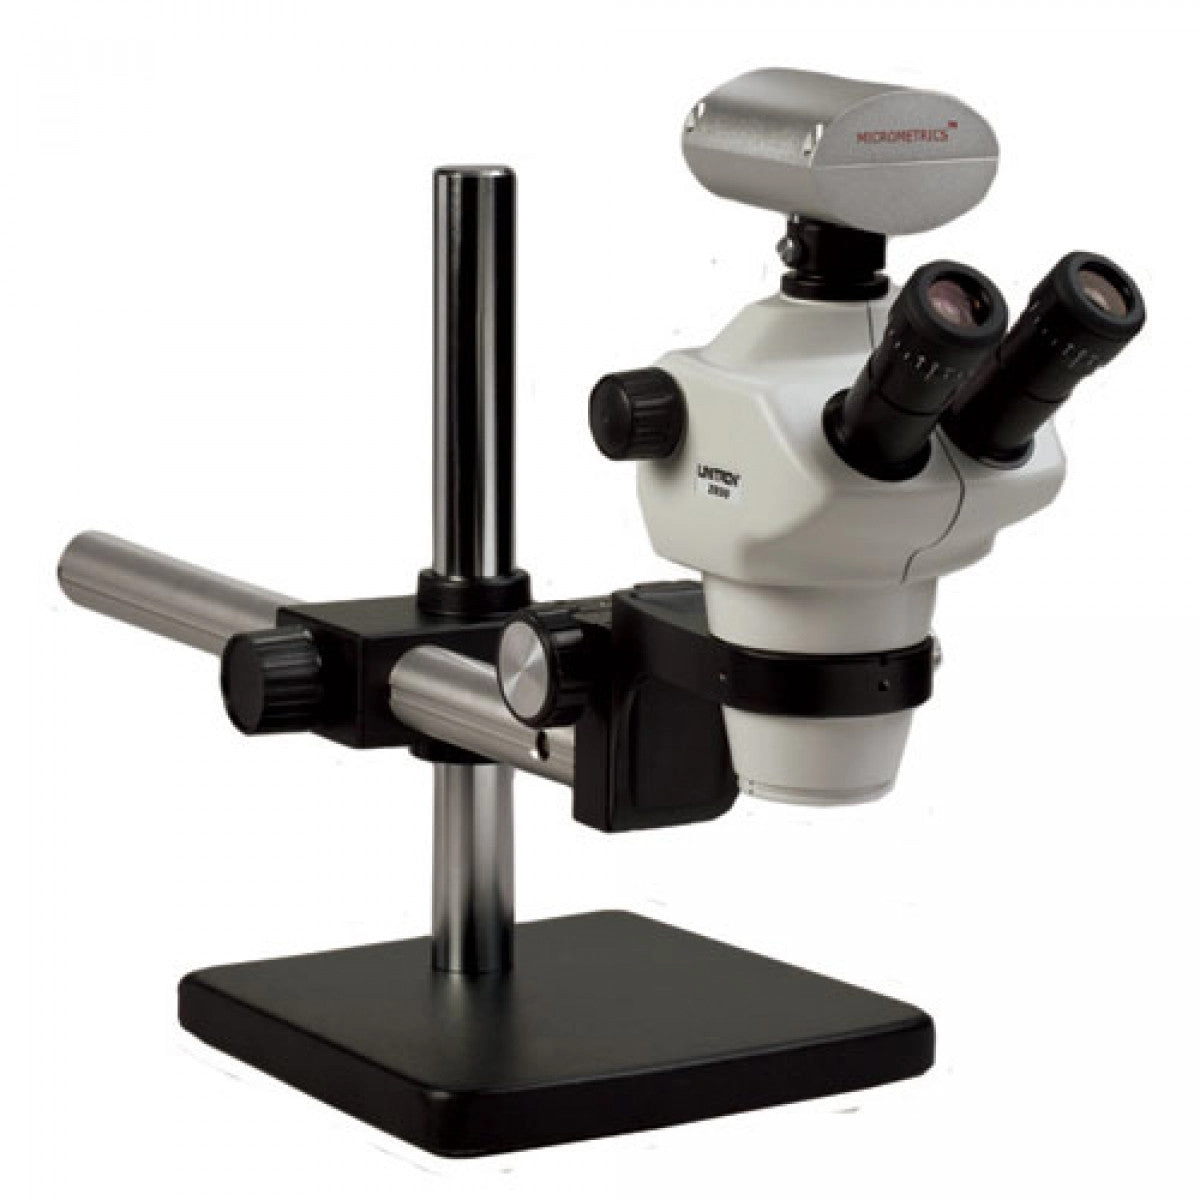 Unitron Z850 Zoom Stereo Microscope on Boom Stand